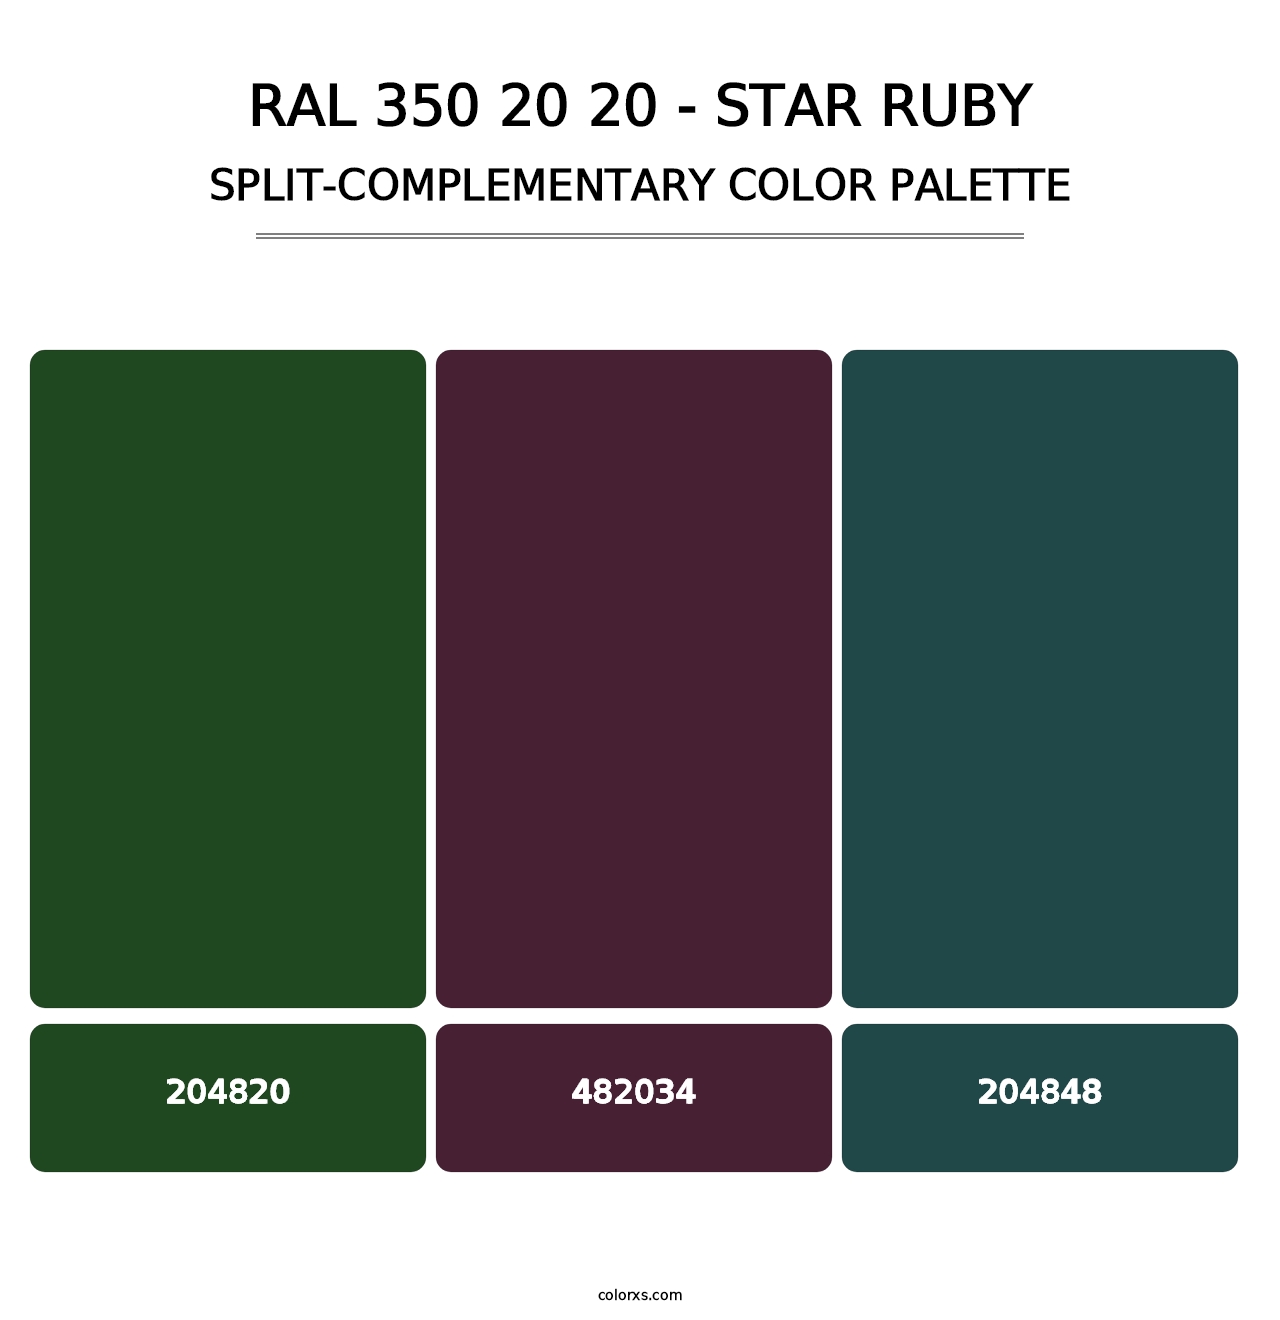 RAL 350 20 20 - Star Ruby - Split-Complementary Color Palette